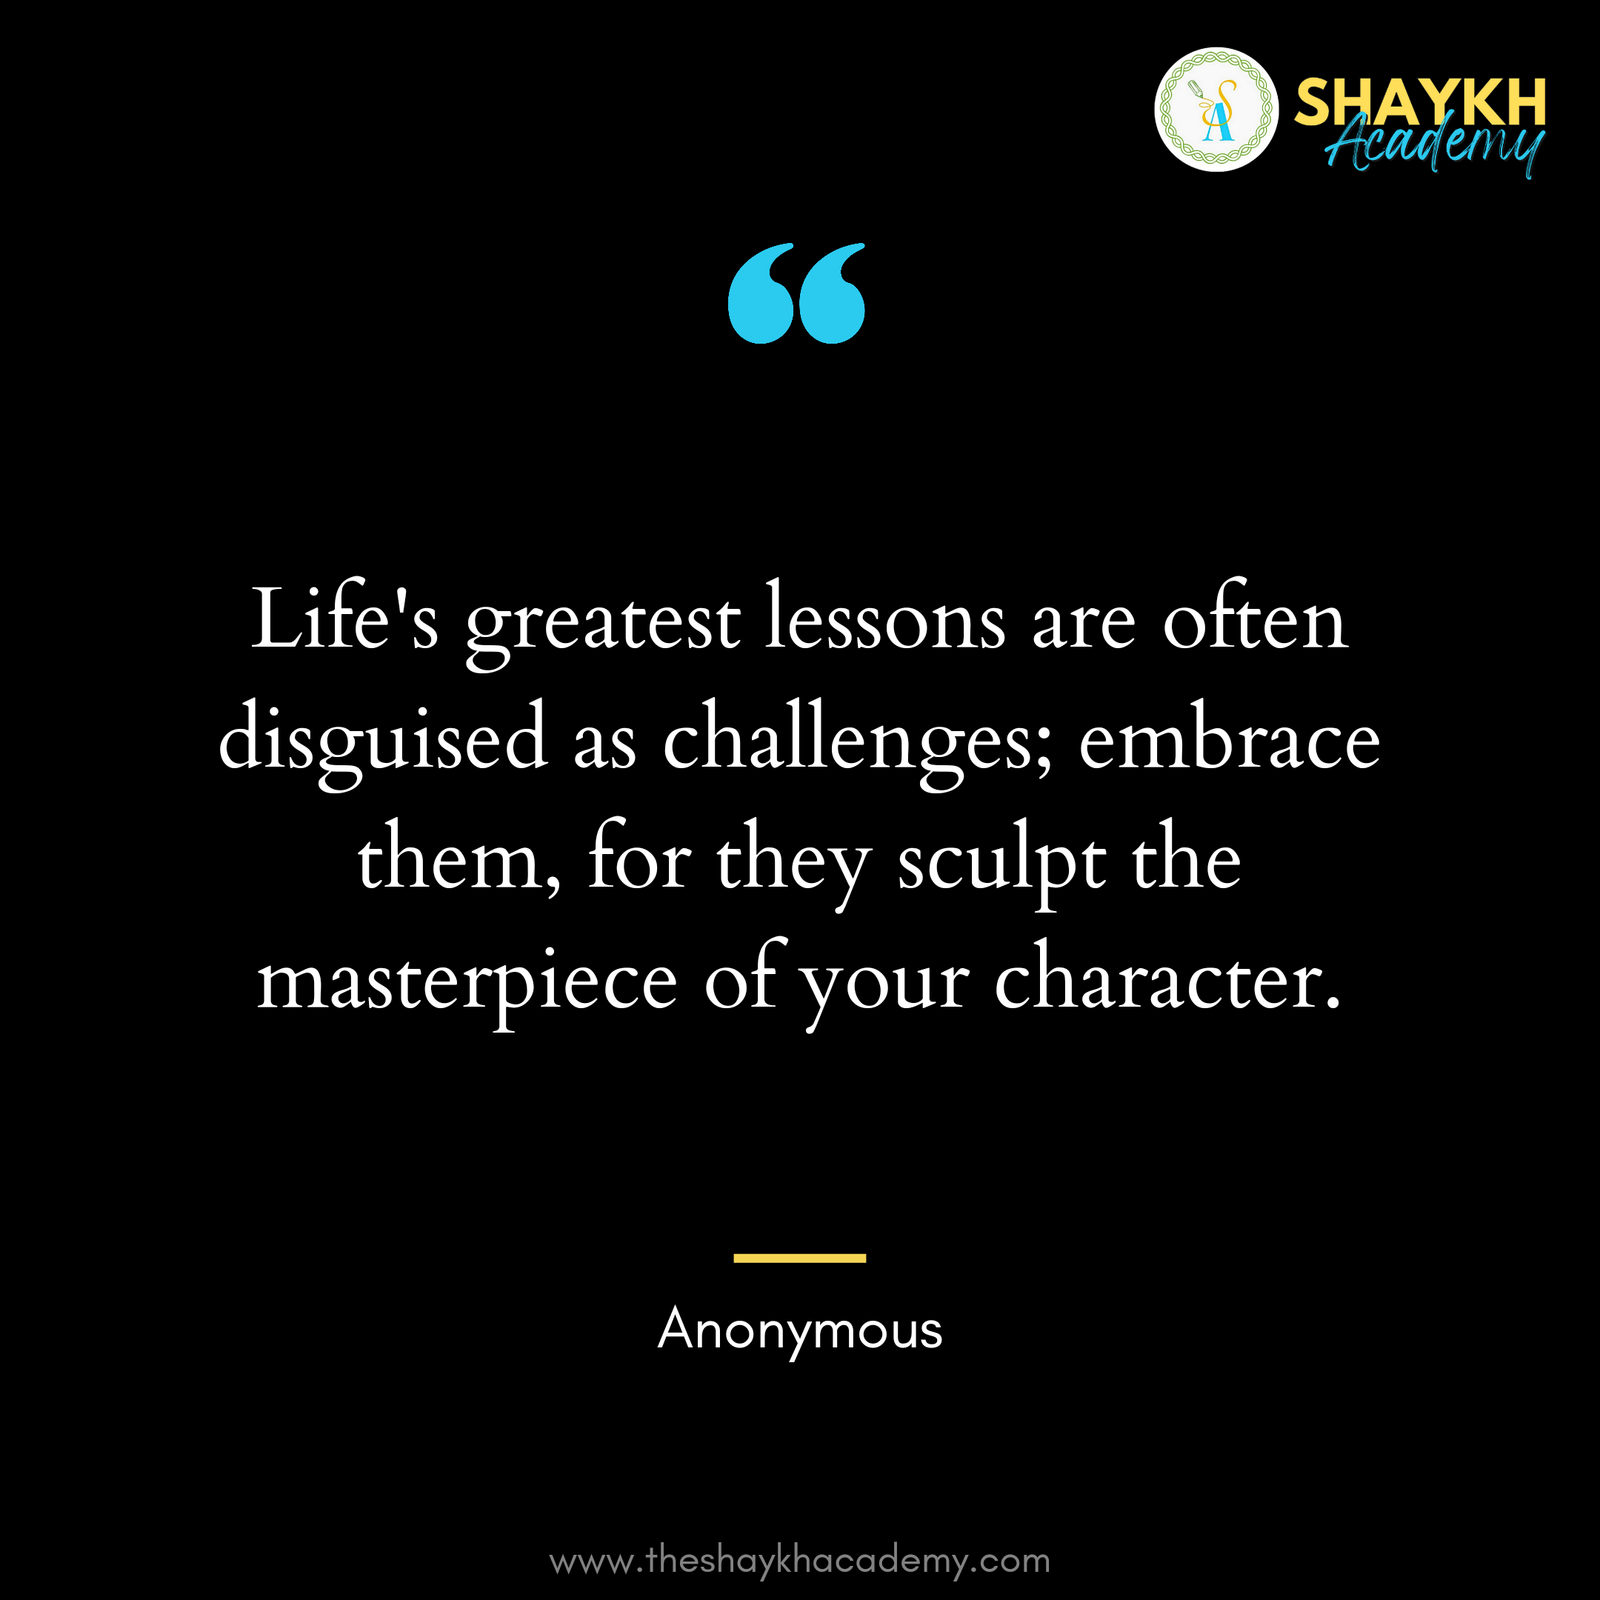 Life's greatest lessons are often disguised as challenges; embrace them, for they sculpt the masterpiece of your character.